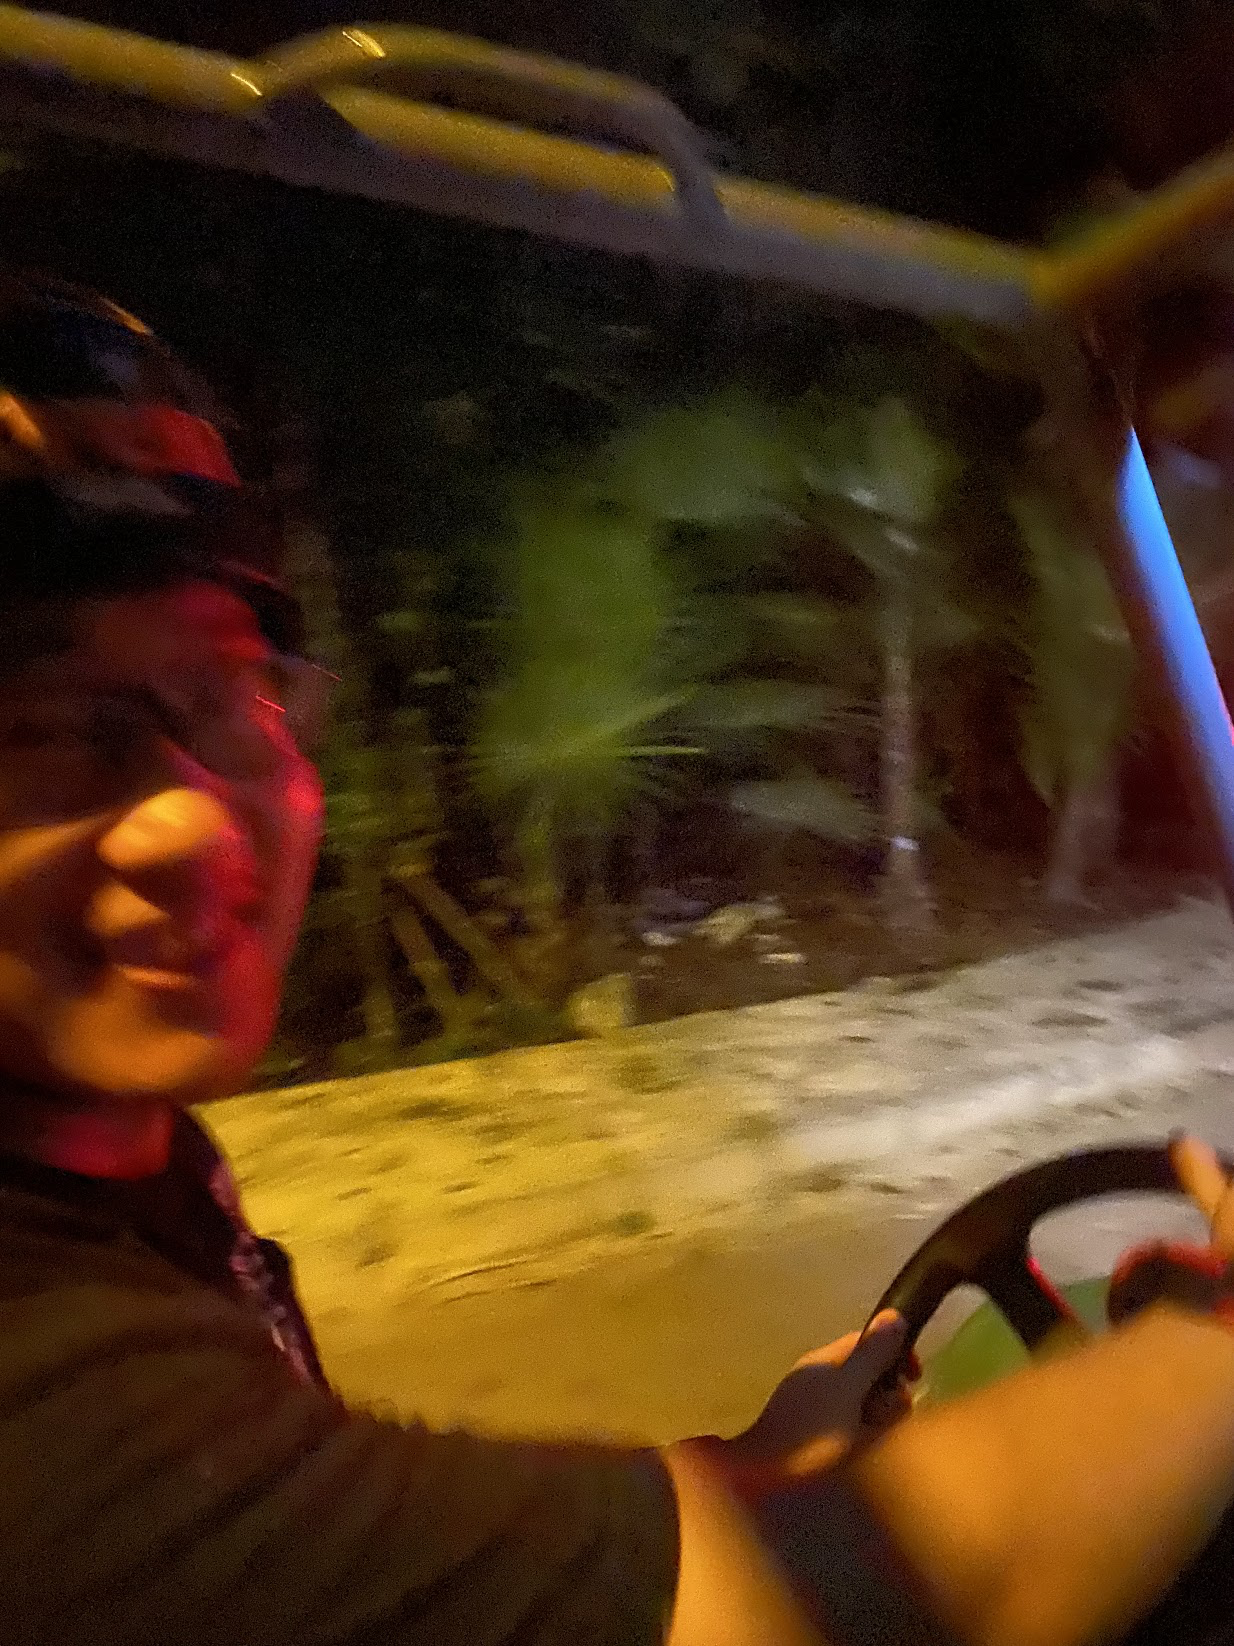 Yes, driving the jeep again at night